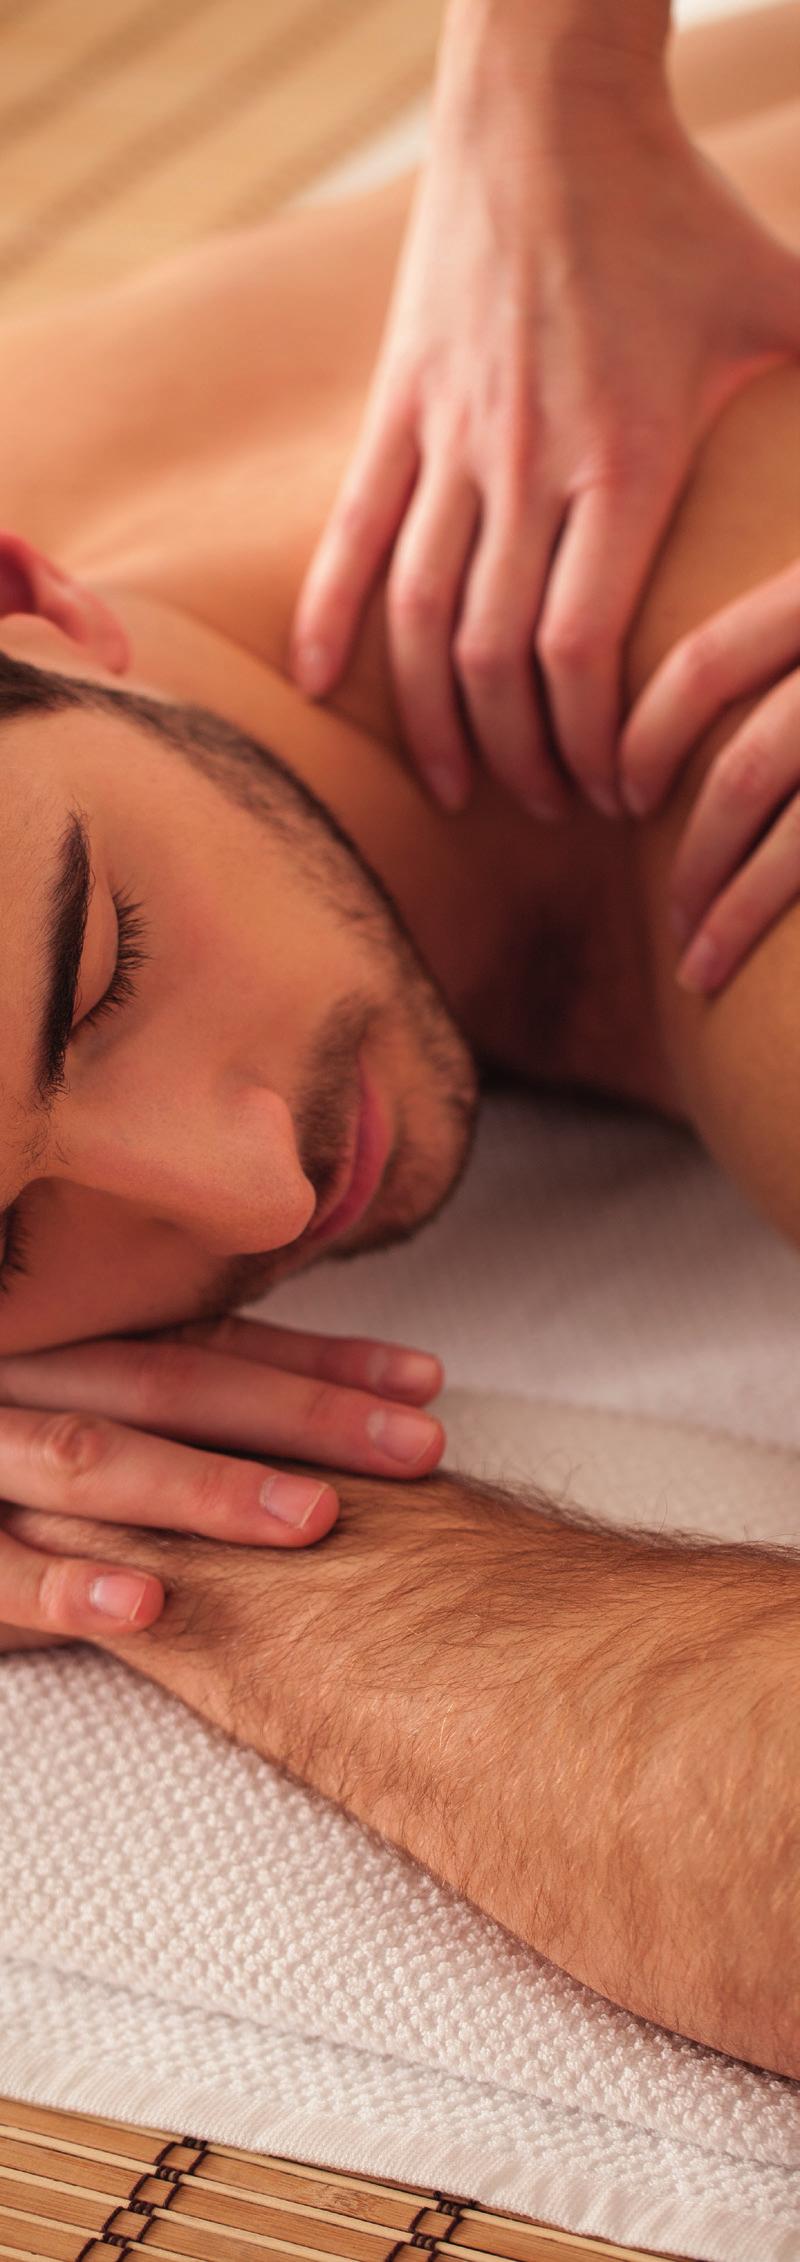 MEN S RETREAT LAVA SHELL FULL BODY MASSAGE (50 mins) 65 This indulgent Lava Shells Relax Body Massage offers an idyllic treatment combining the warmth of the shells with deeply relaxing massage